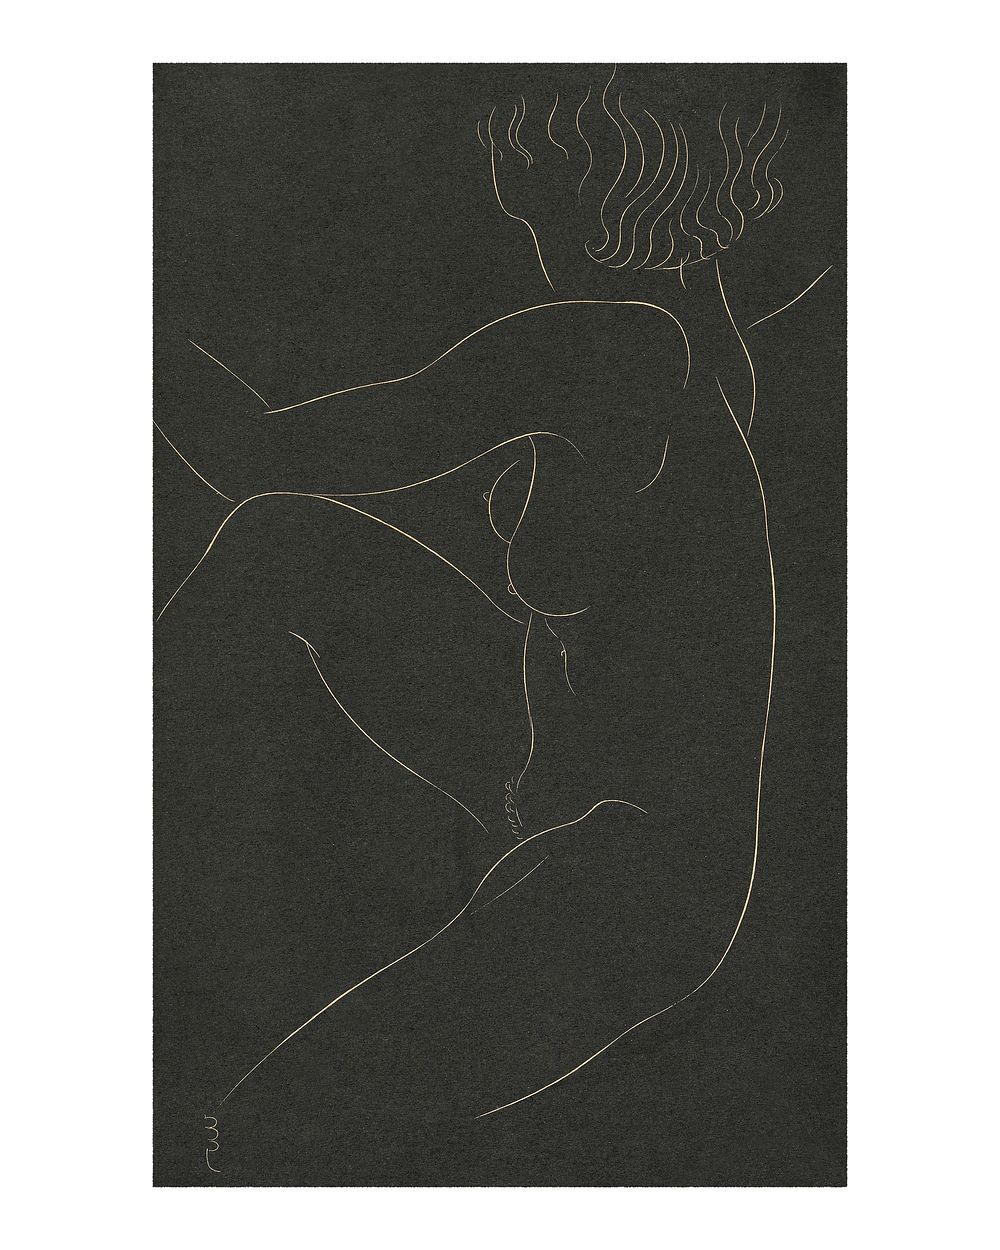 Woman line art poster, vintage drawing remixed from the artwork of Eric Gill